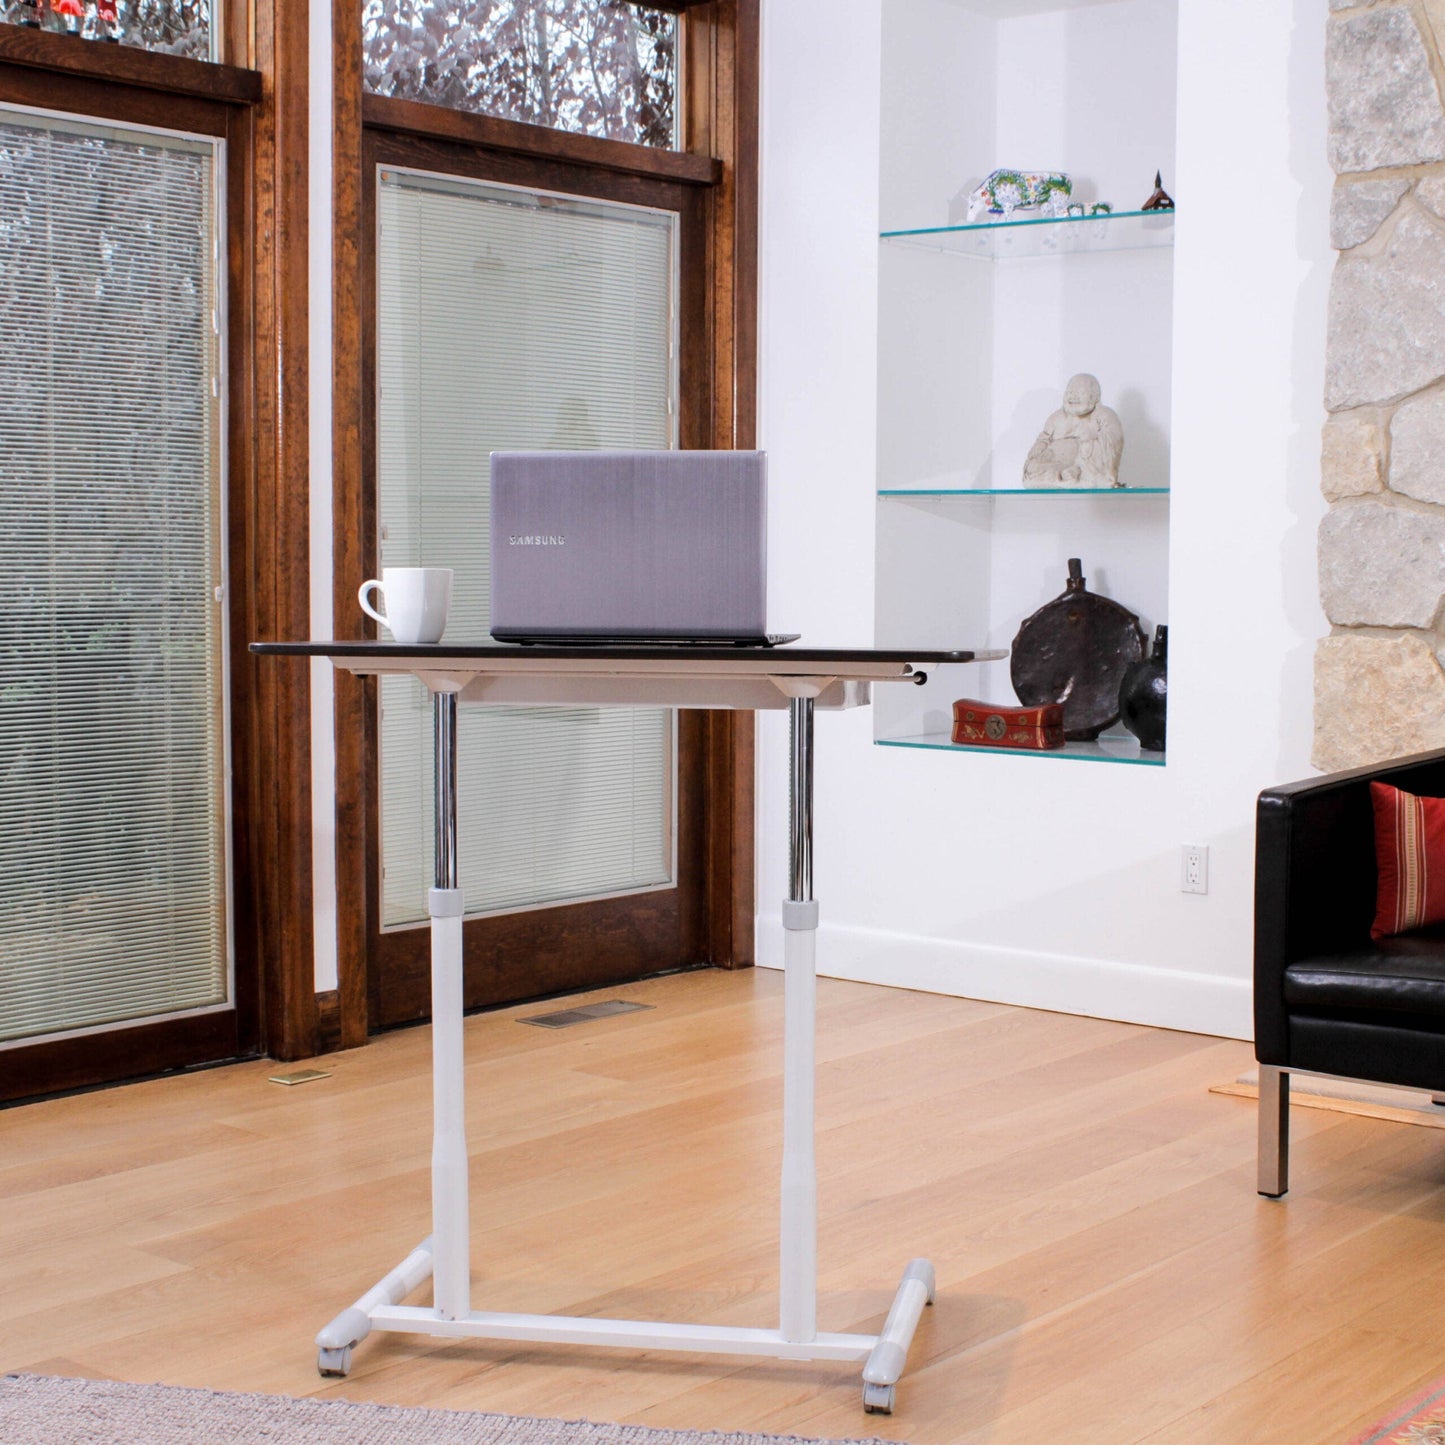 MOBILE SIT-STAND DESK WITH SILVER BASE - standupdeskdepot.com